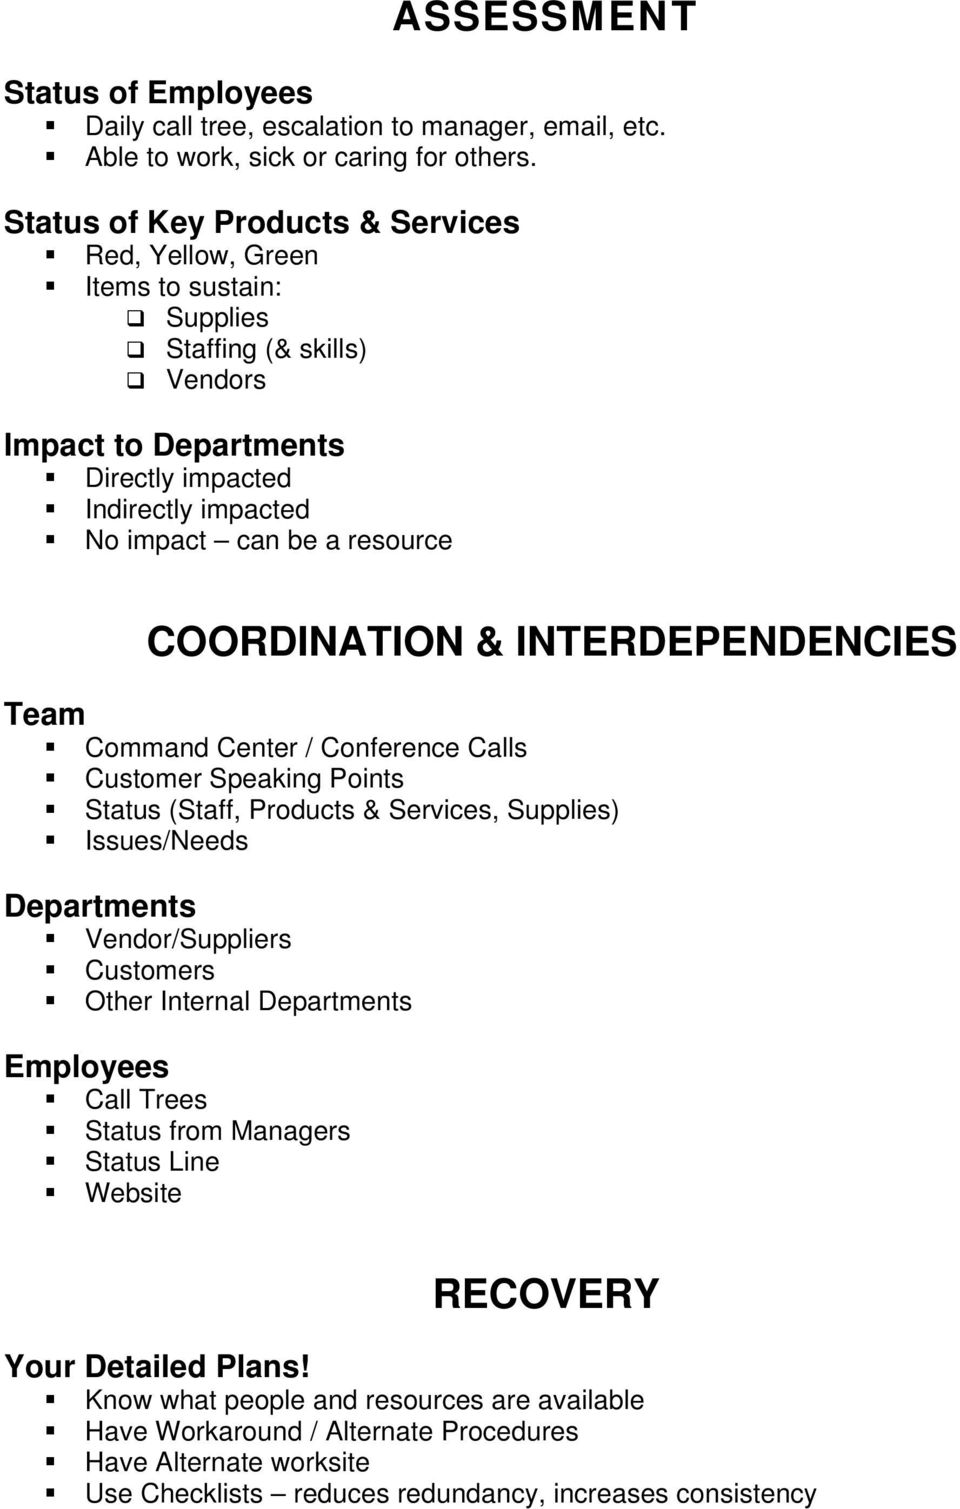 COORDINATION & INTERDEPENDENCIES Team Command Center / Conference Calls Customer Speaking Points Status (Staff, Products & Services, Supplies) Issues/Needs Departments Vendor/Suppliers Customers